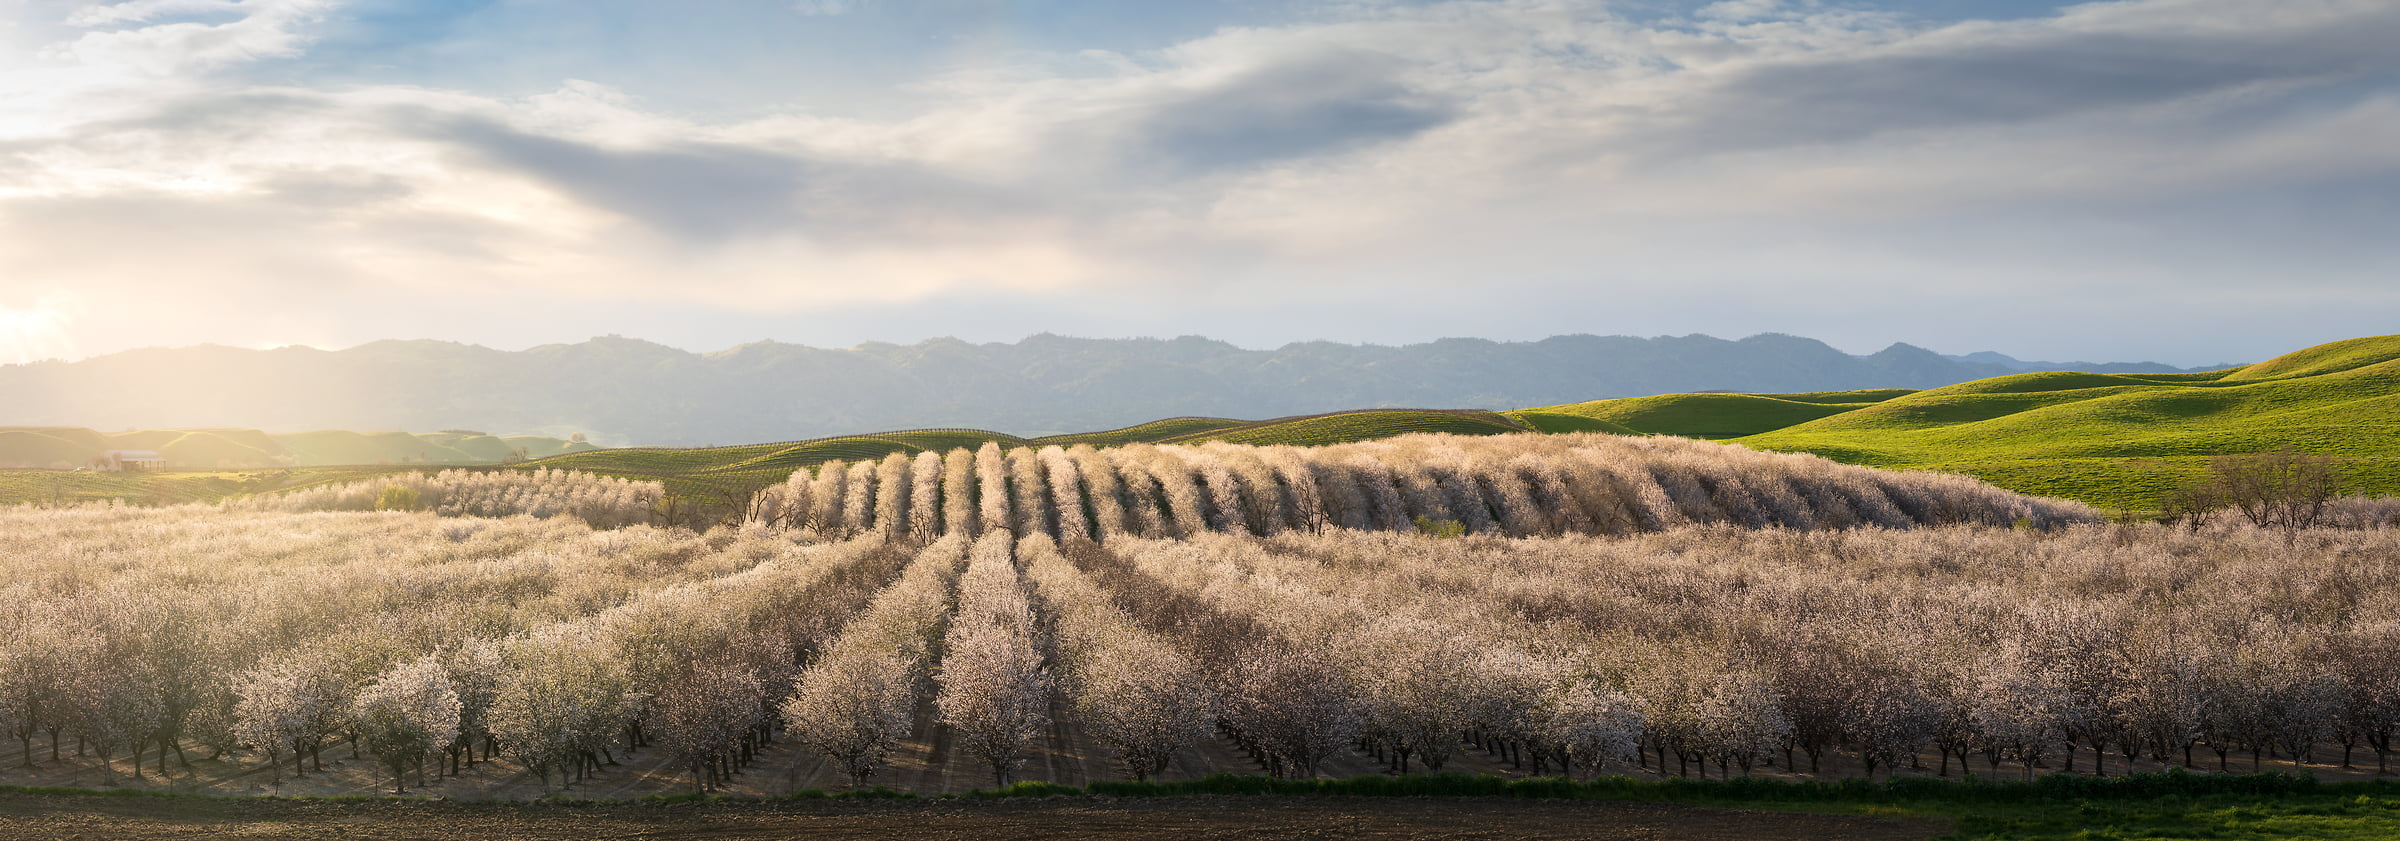 246 megapixels! A very high resolution, large-format VAST photo print of a field in Central Valley, California; landscape photograph created by Jeff Lewis in Central Valley, California